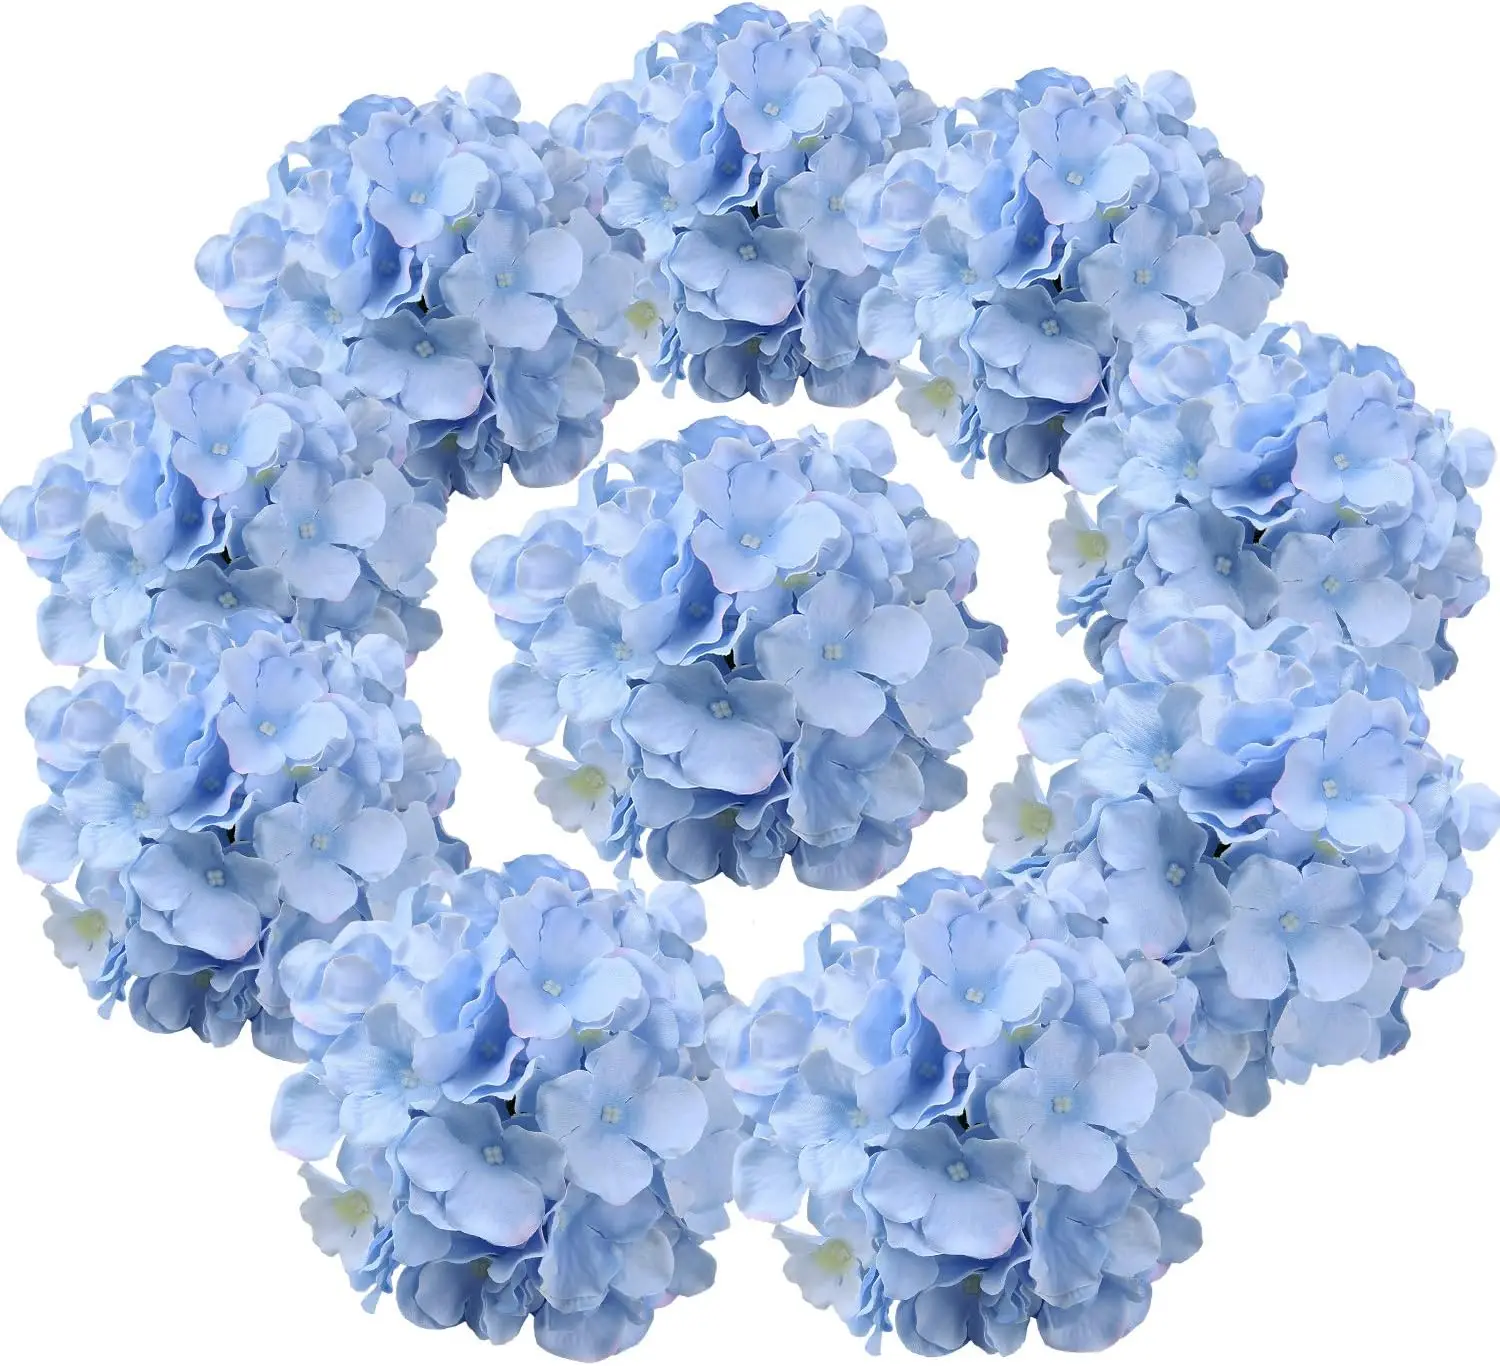 

Silk Hydrangea Heads Artificial Flowers Heads with Stems for Home Wedding Decor,Pack of 10